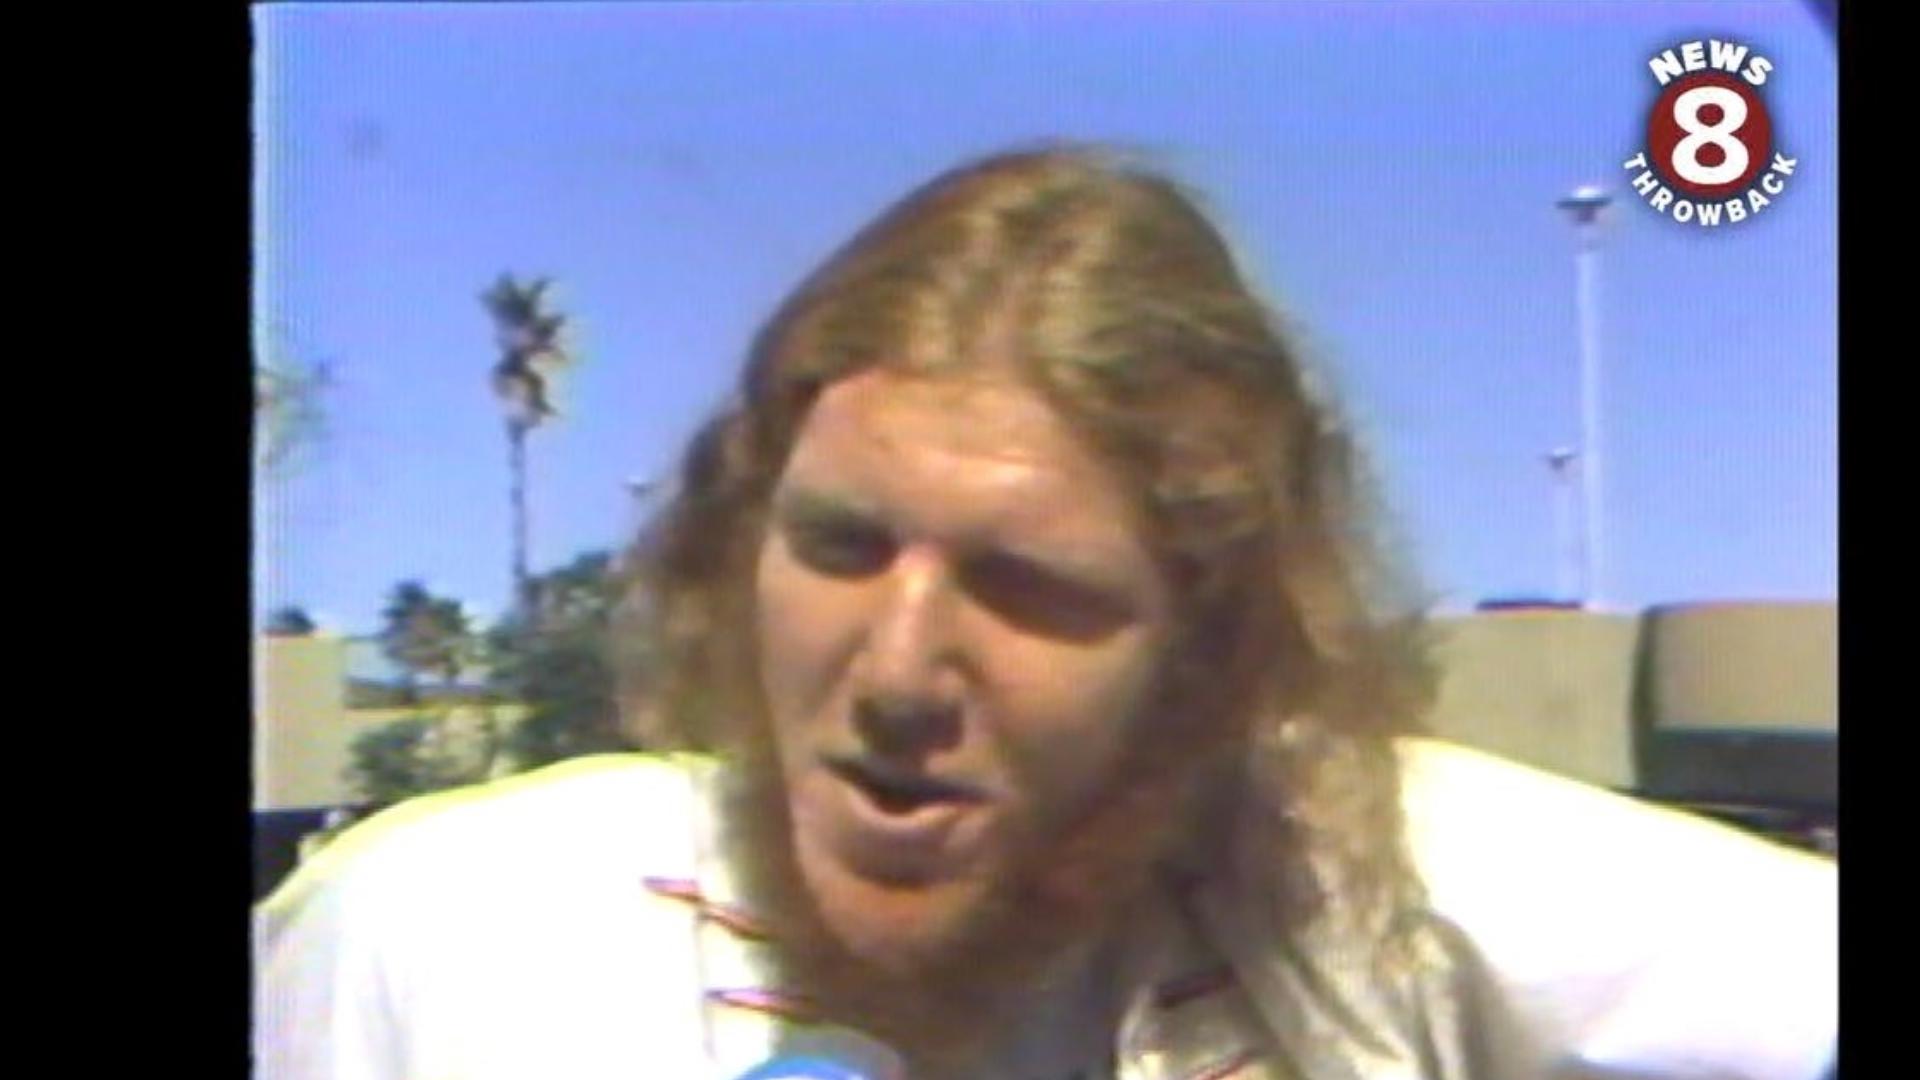 News 8 interviewed the late Bill Walton in 1975.